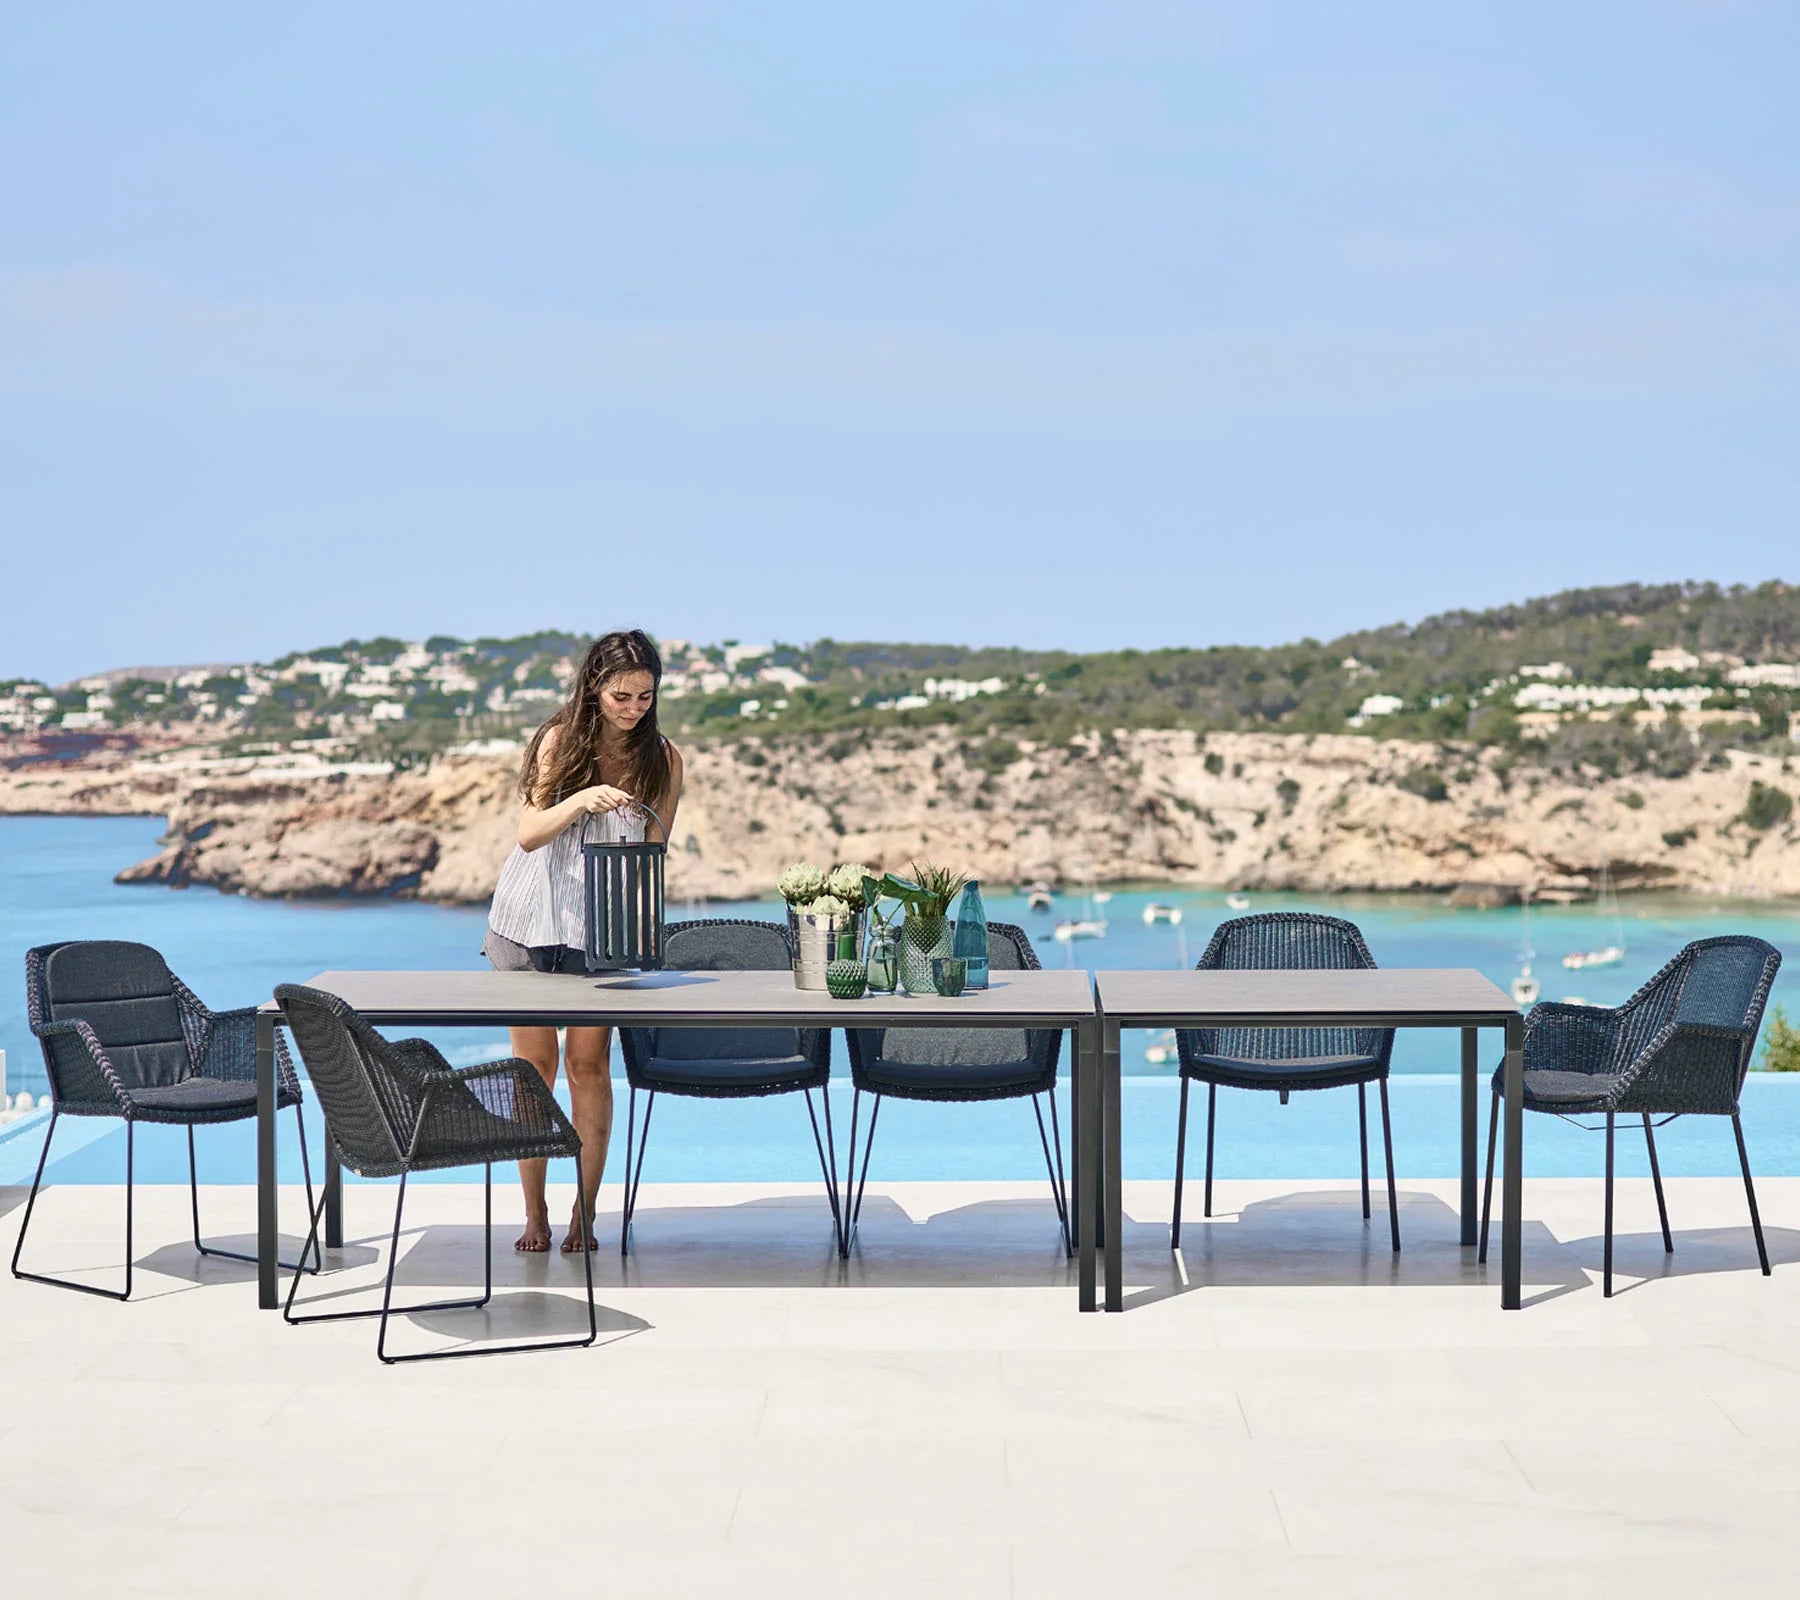 Boxhill's Pure lava grey aluminum outdoor dining table with black outdoor dining chairs and a woman holding a black lantern